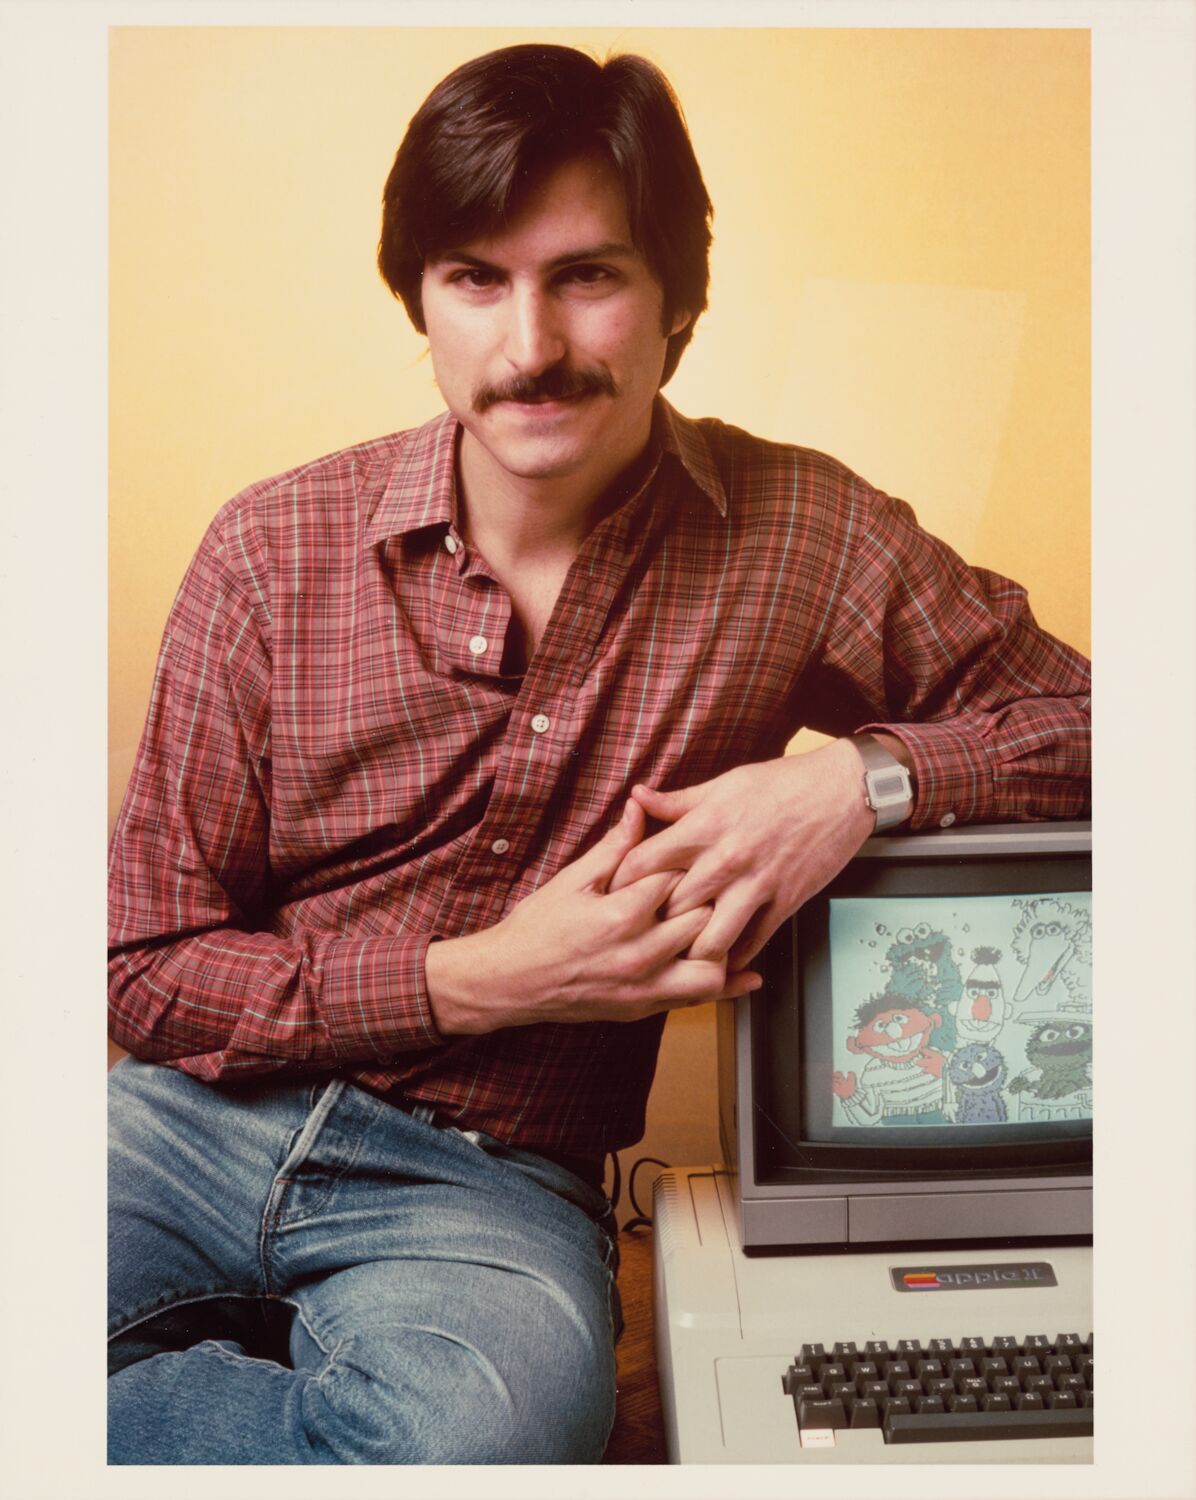 With tidy hair and a plaid shirt, Steve poses with an Apple II displaying drawings of Sesame Street characters.